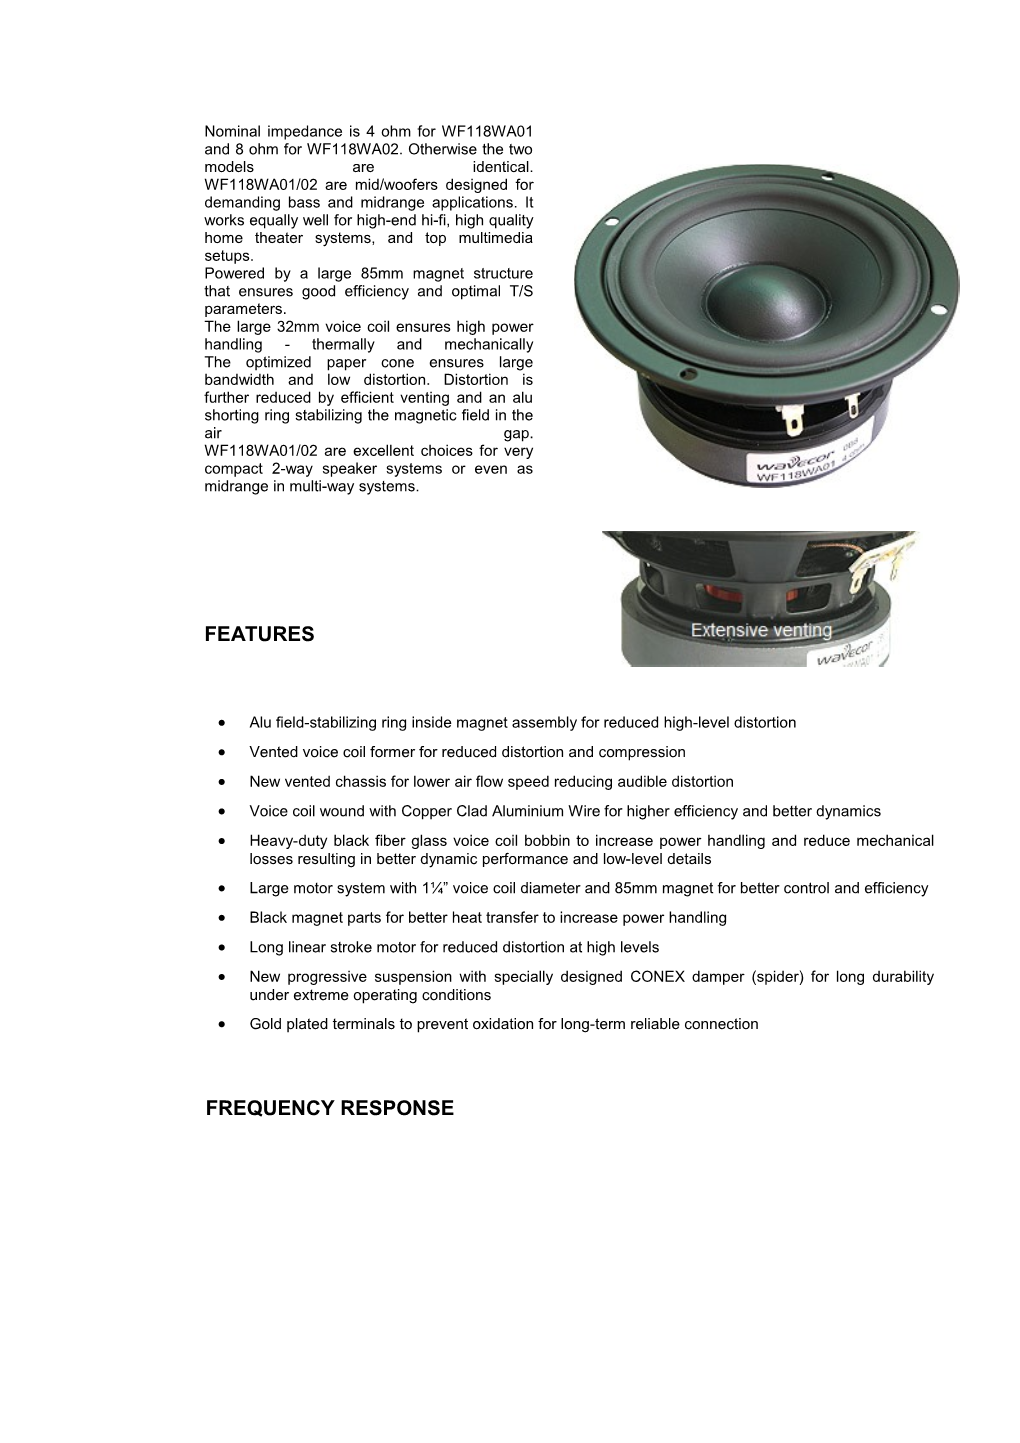 Vented Voice Coil Former for Reduced Distortion and Compression